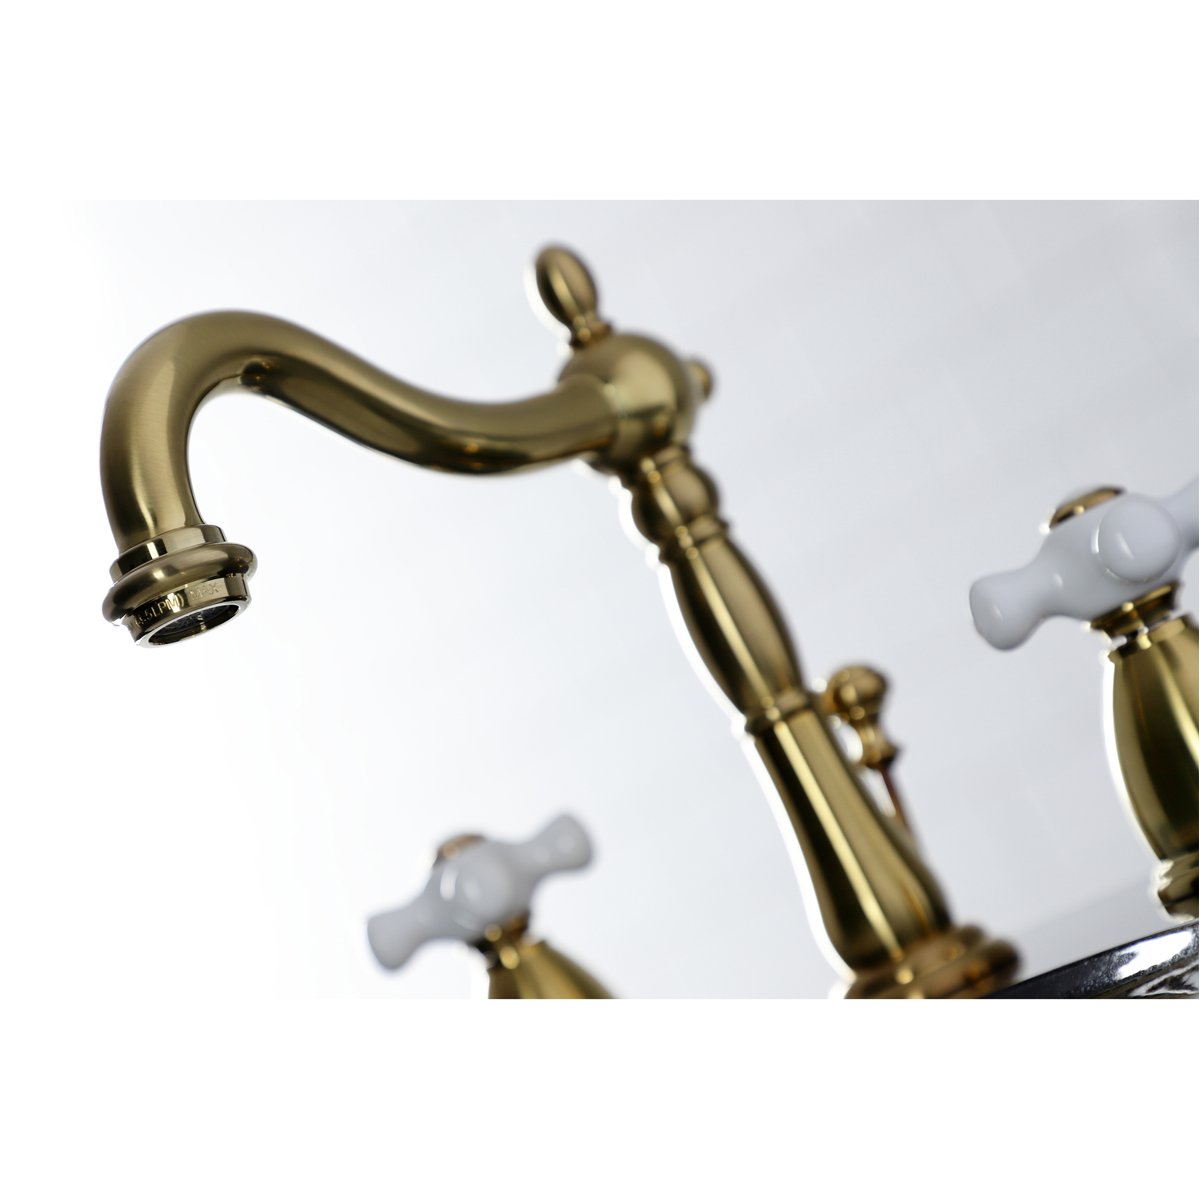 Kingston Brass Heritage 8-Inch Widespread 3-Hole Bathroom Faucet